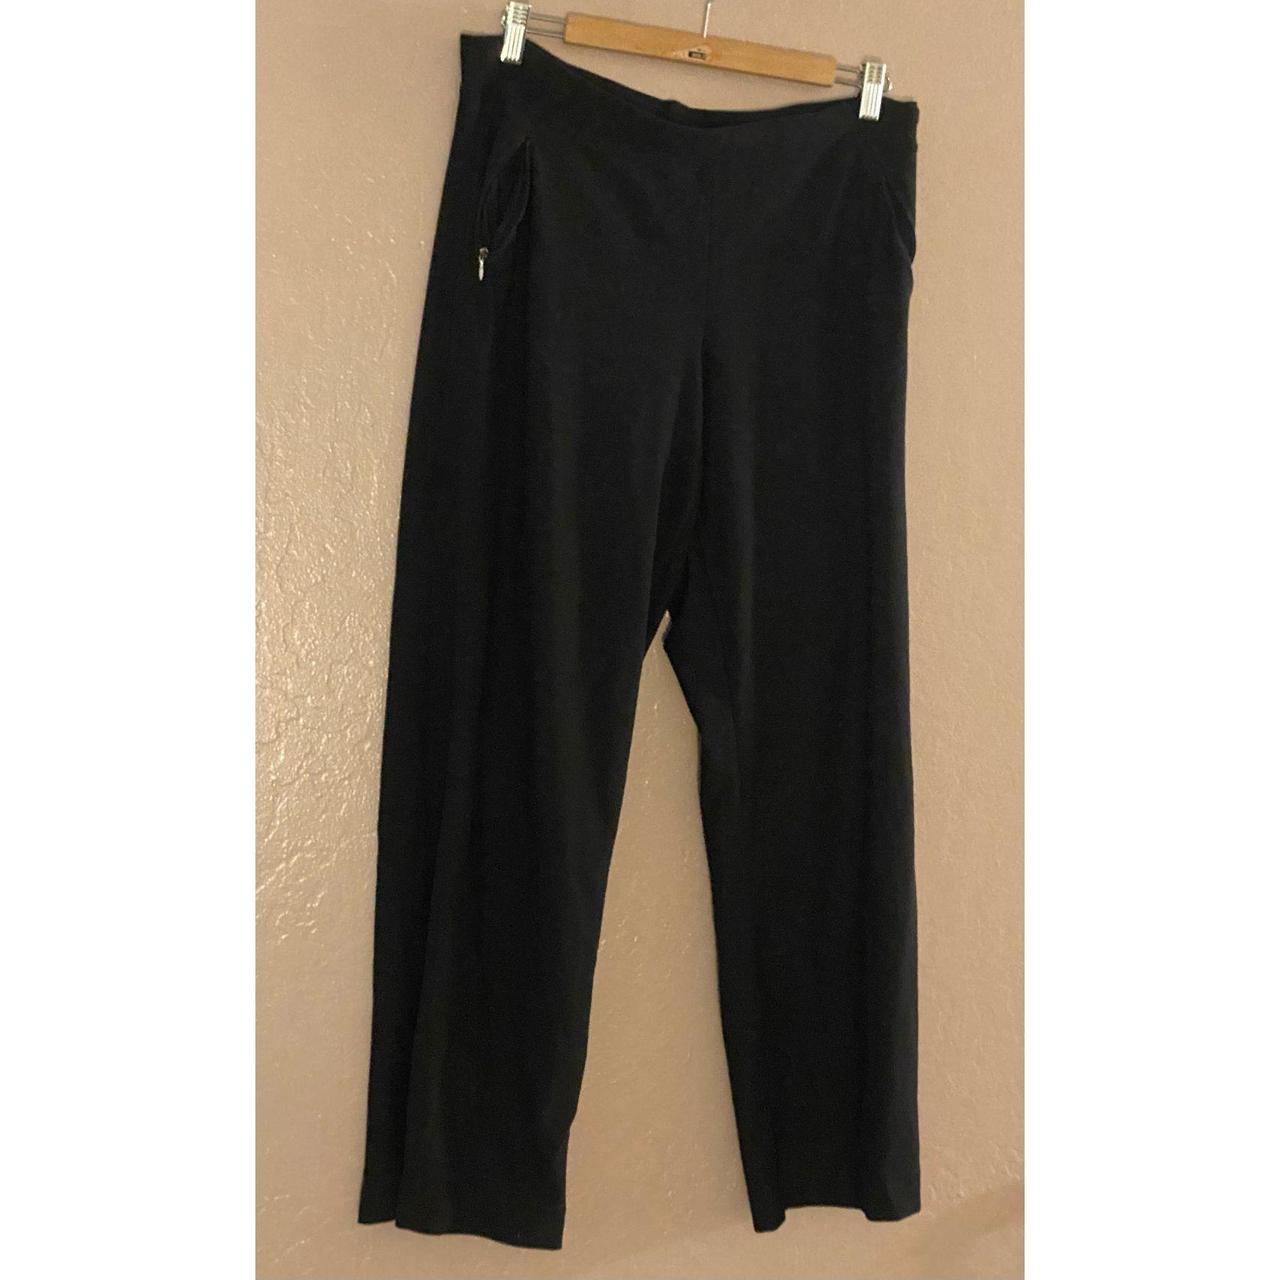 Product Image 4 - Lucy Women’s Training Pants Black